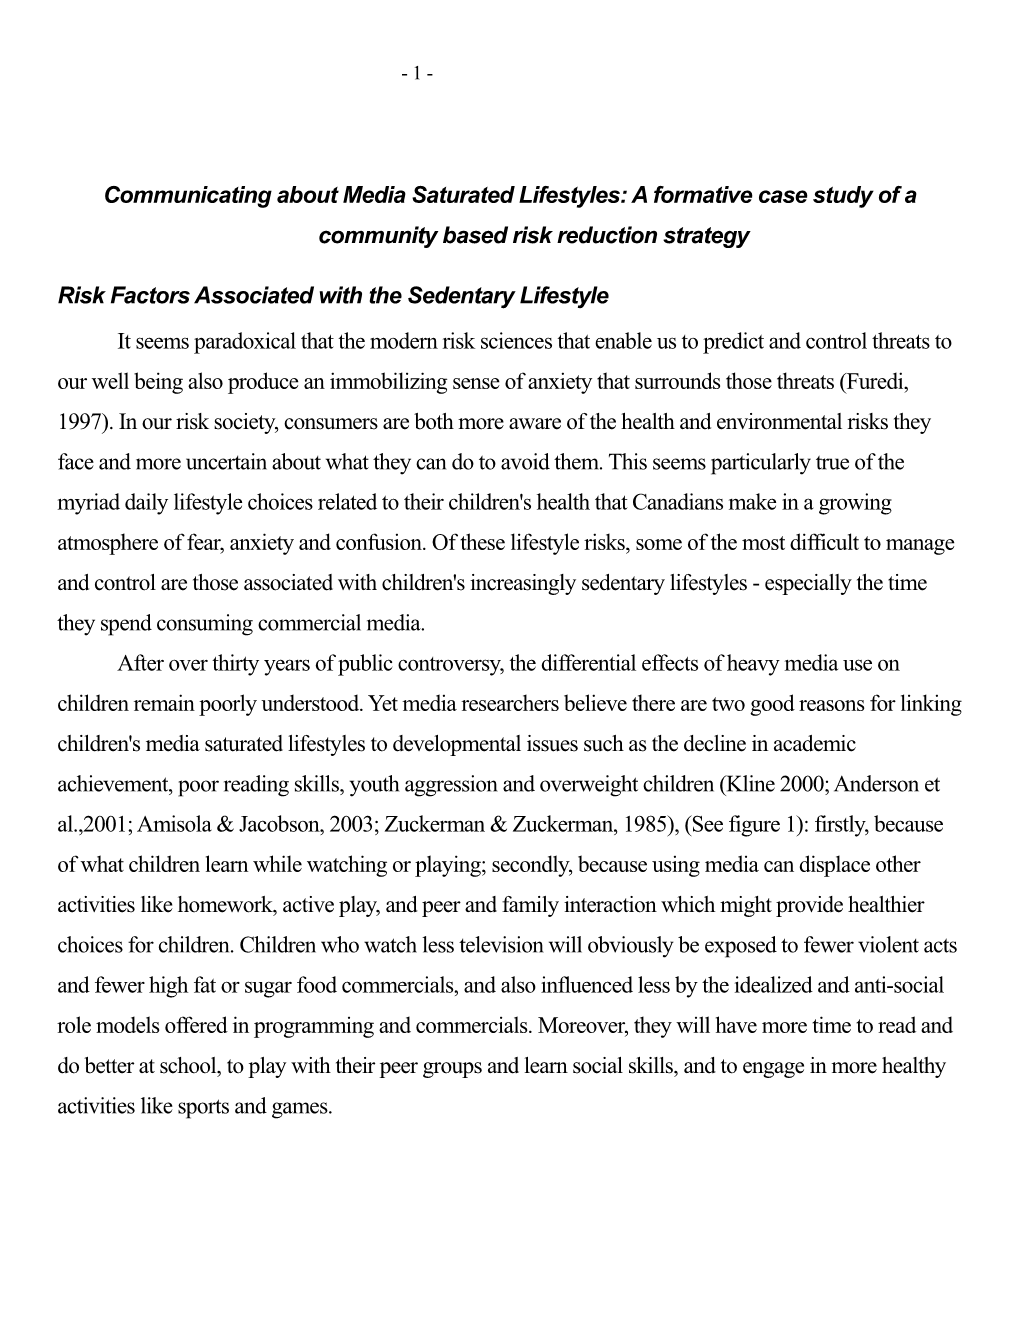 Communicating About Media Saturated Lifestyles: a Formative Case Study of a Community Based